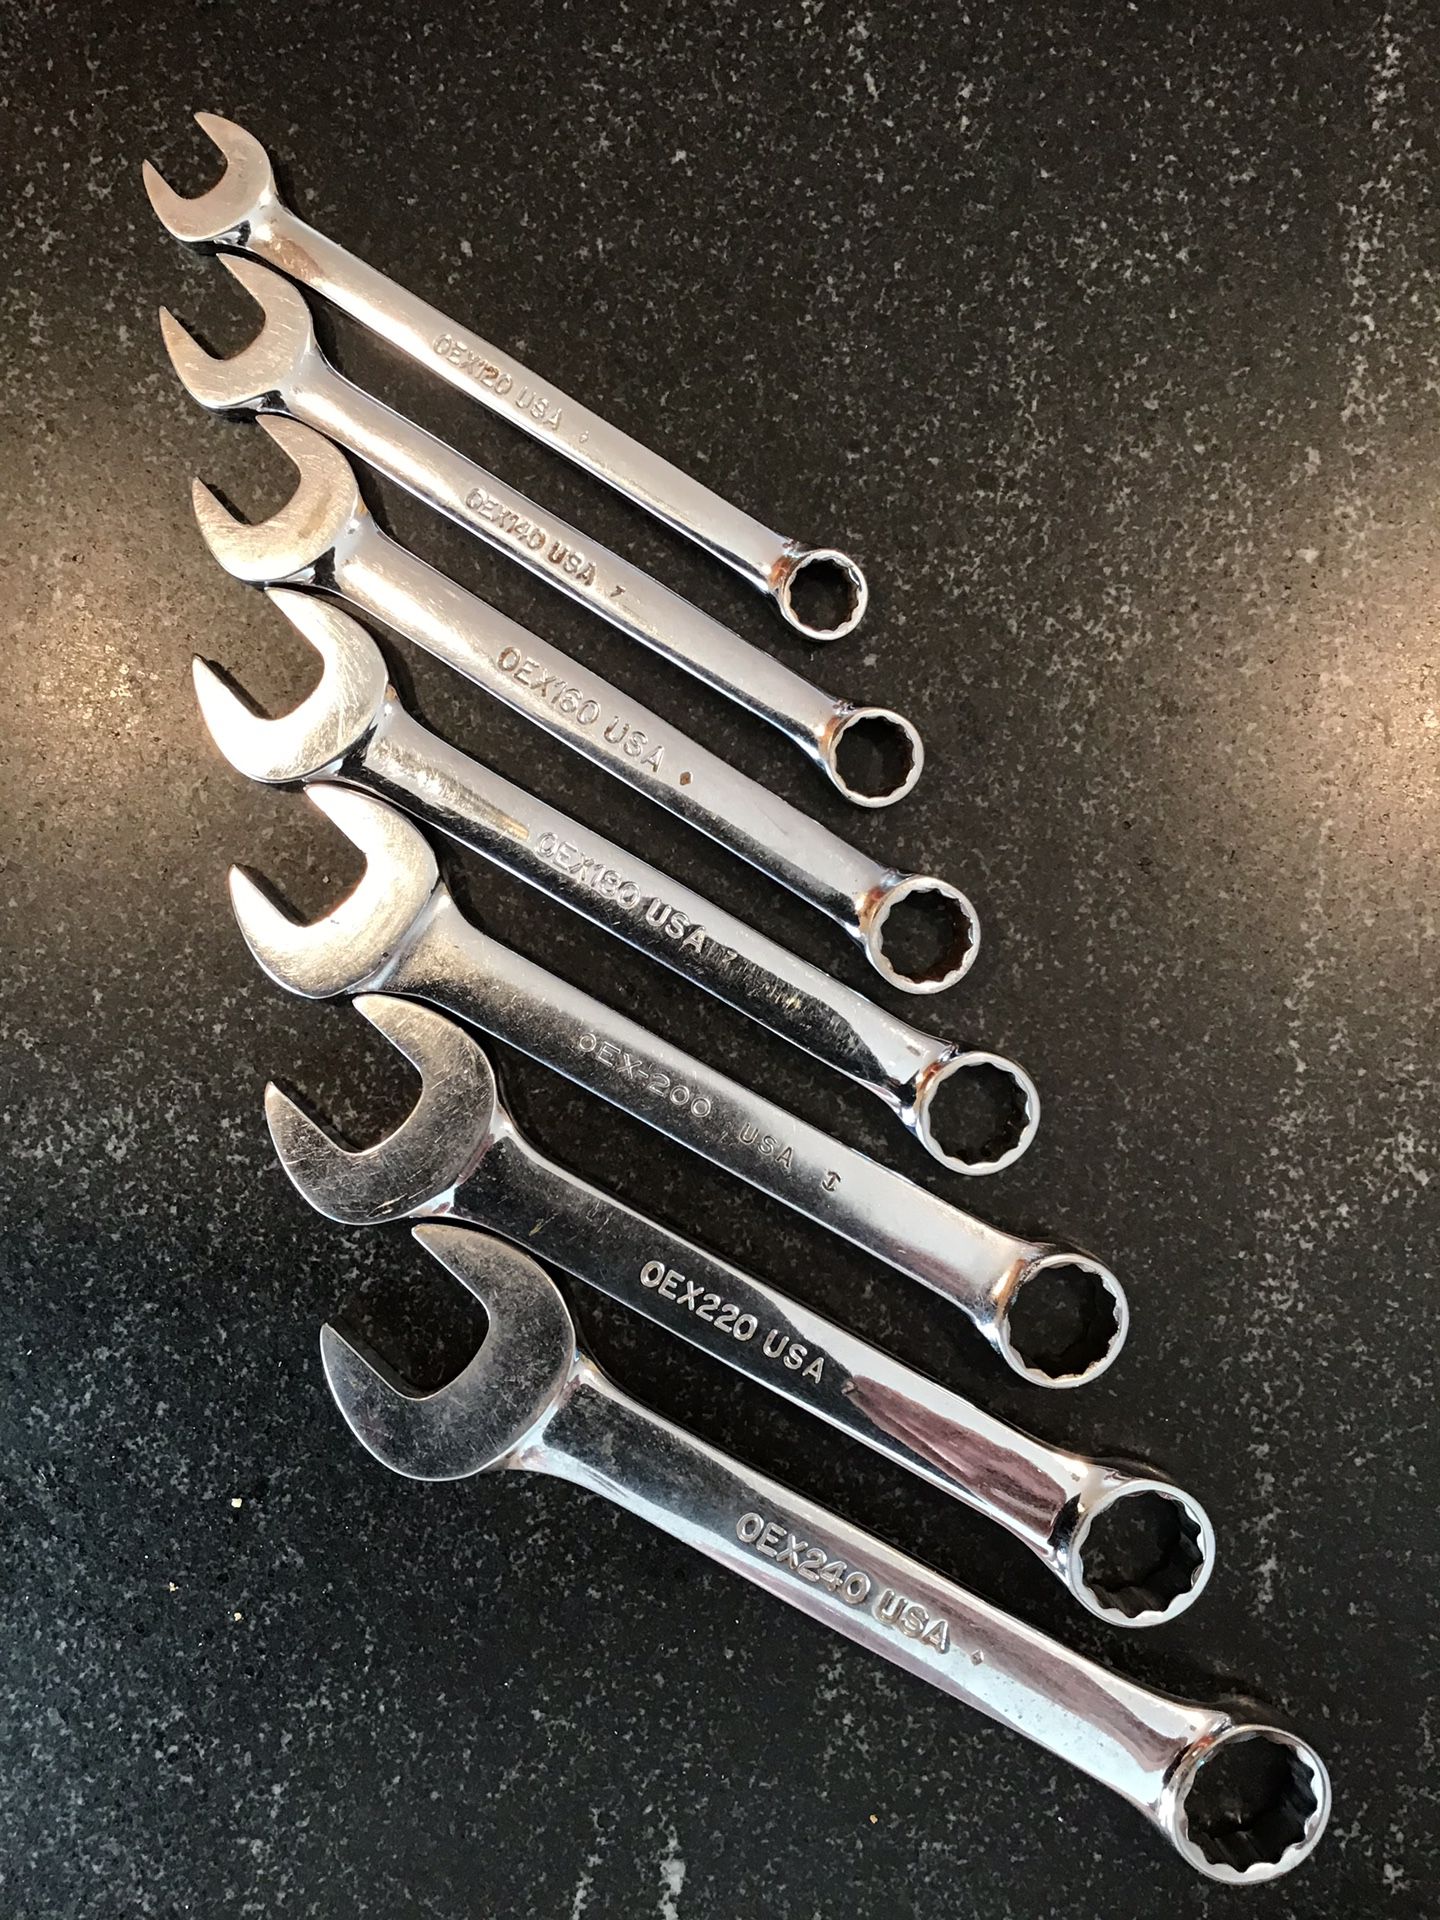 Snap-on short wrench set